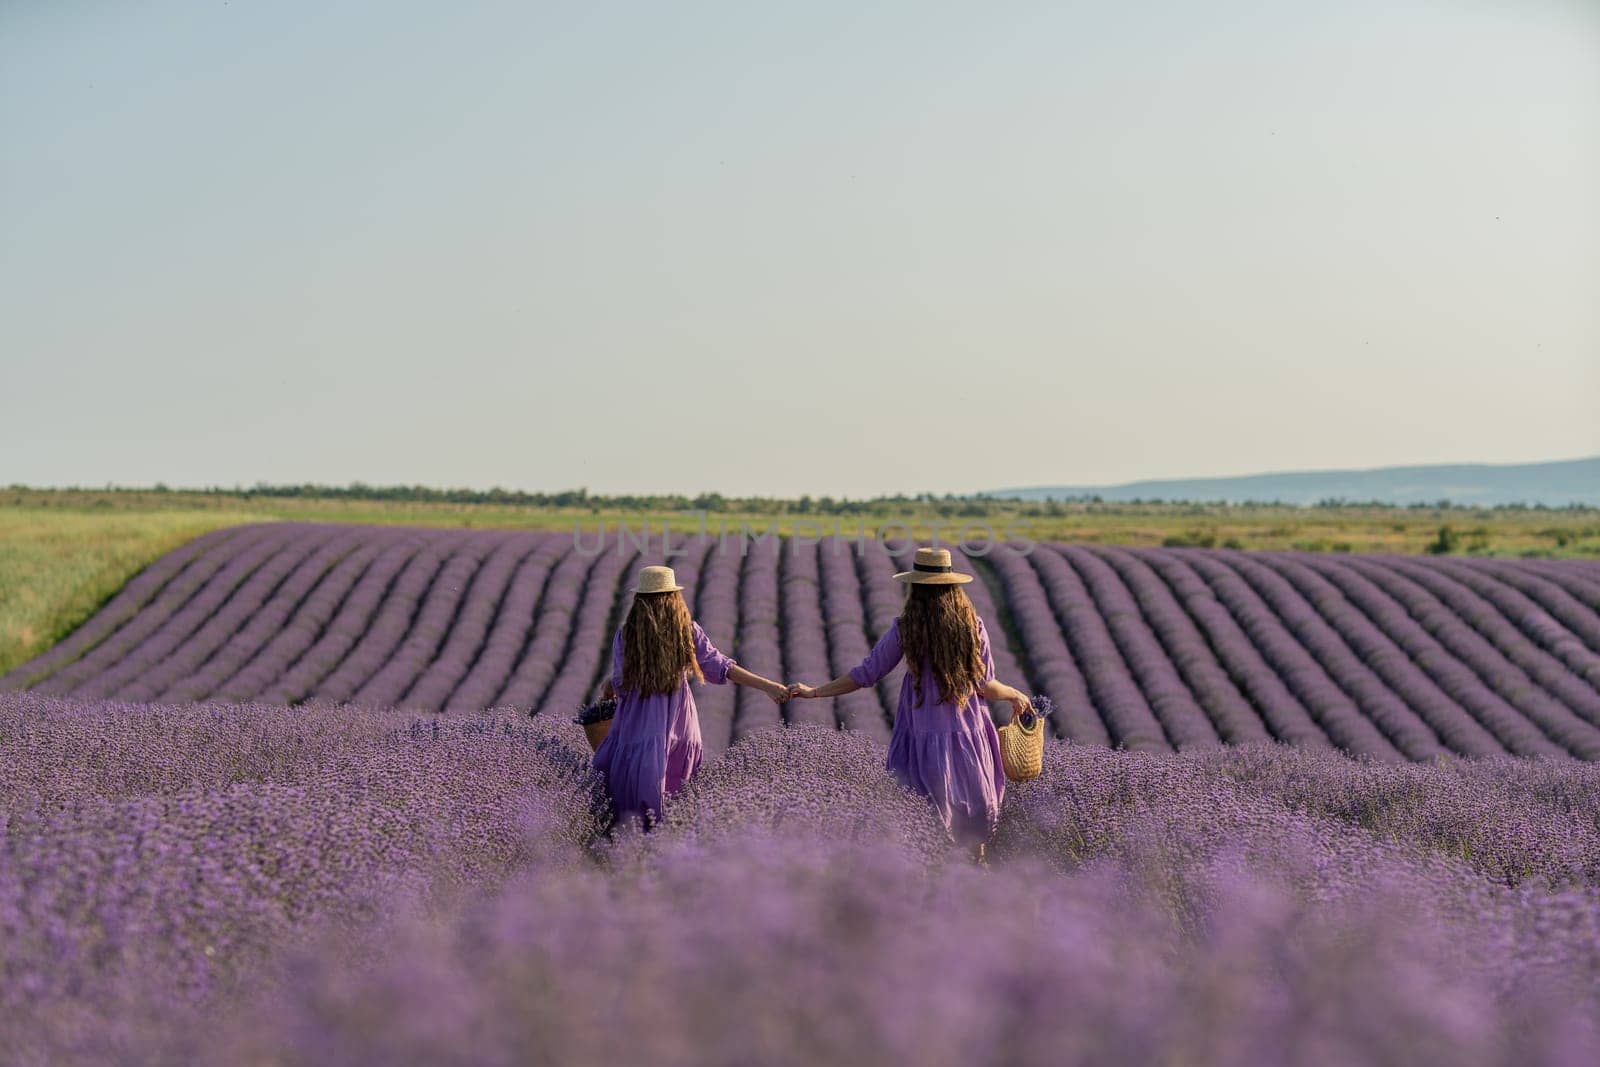 Mom and daughter are running through a lavender field dressed in purple dresses, long hair flowing and wearing hats. The field is full of purple flowers and the sky is clear